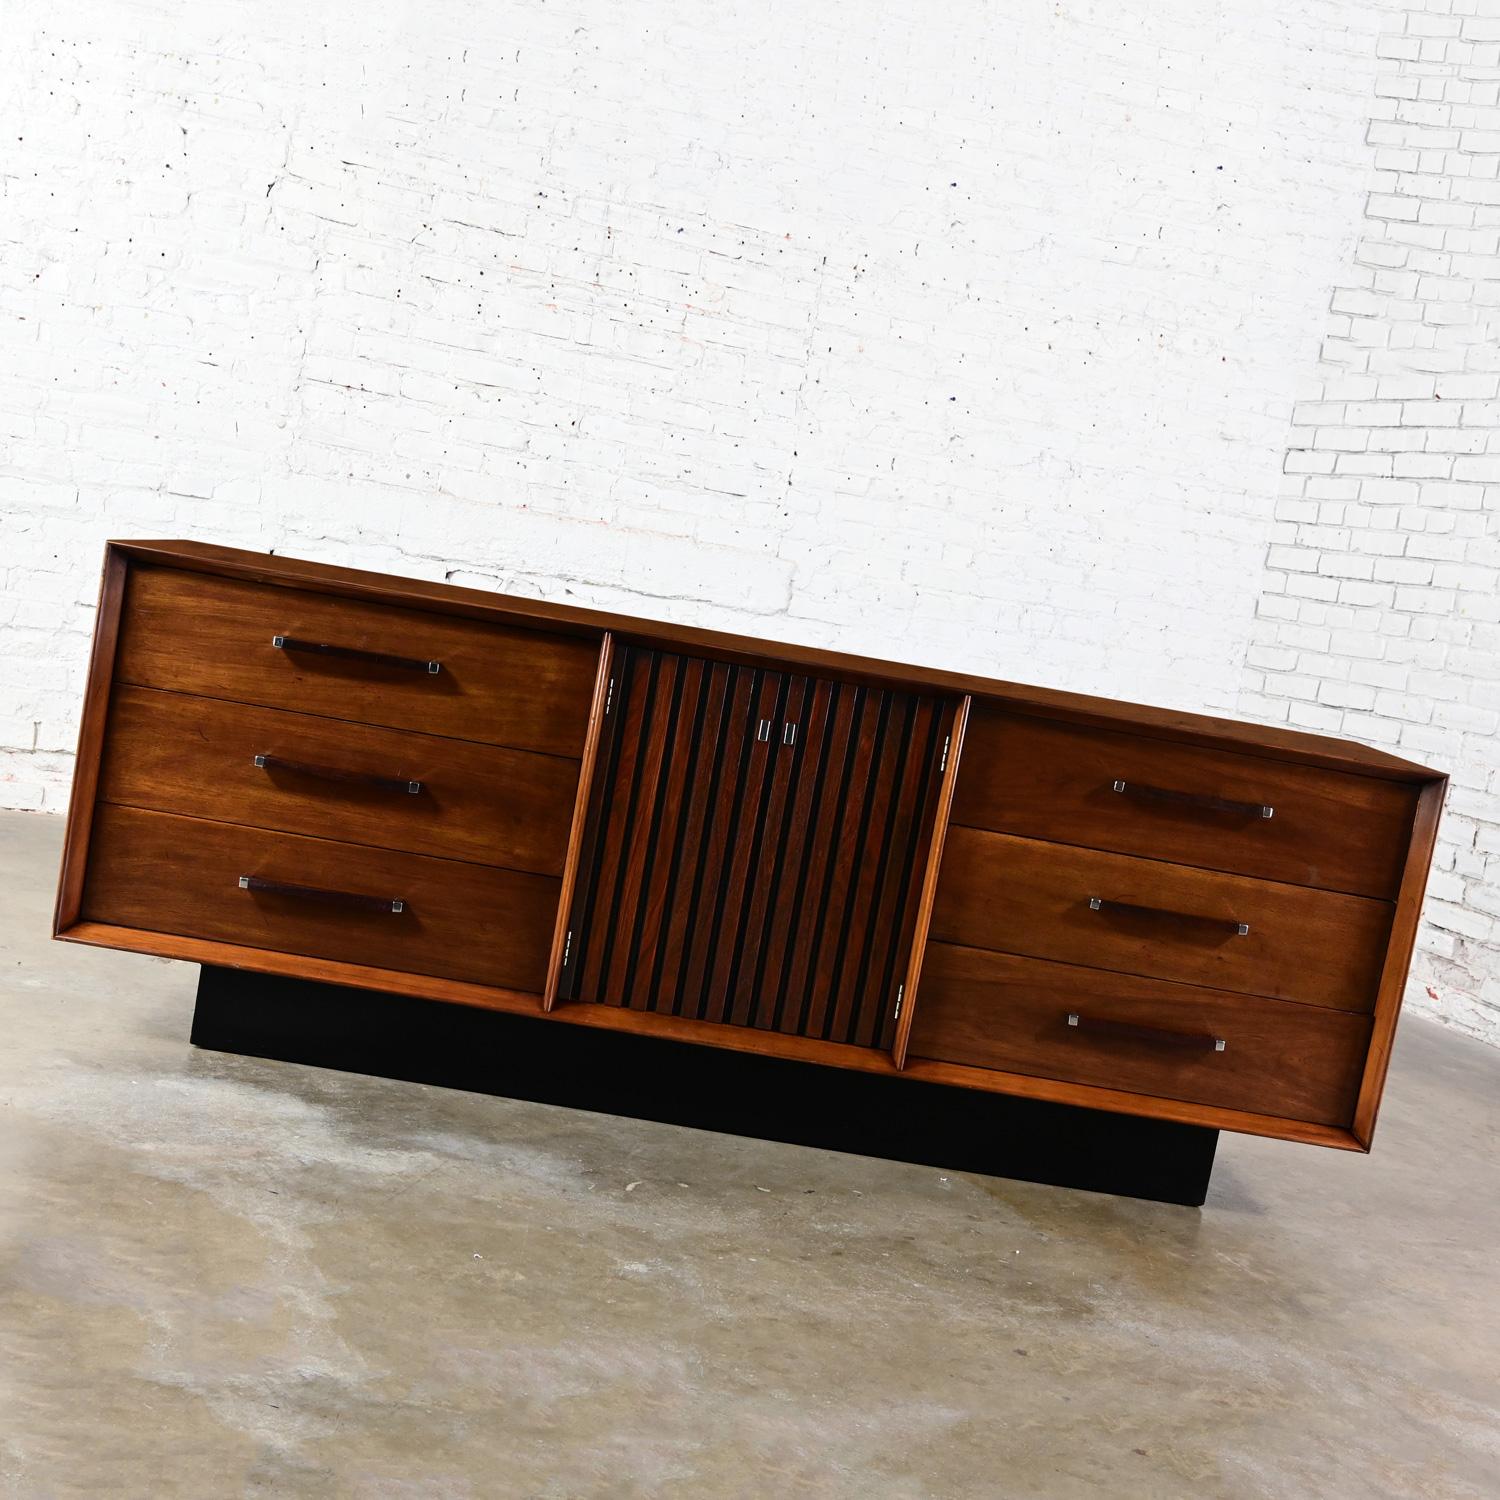 Late 20th Century 1971 MCM Lane Dresser Credenza Buffet Tower Suite Collection Walnut & Rosewood For Sale